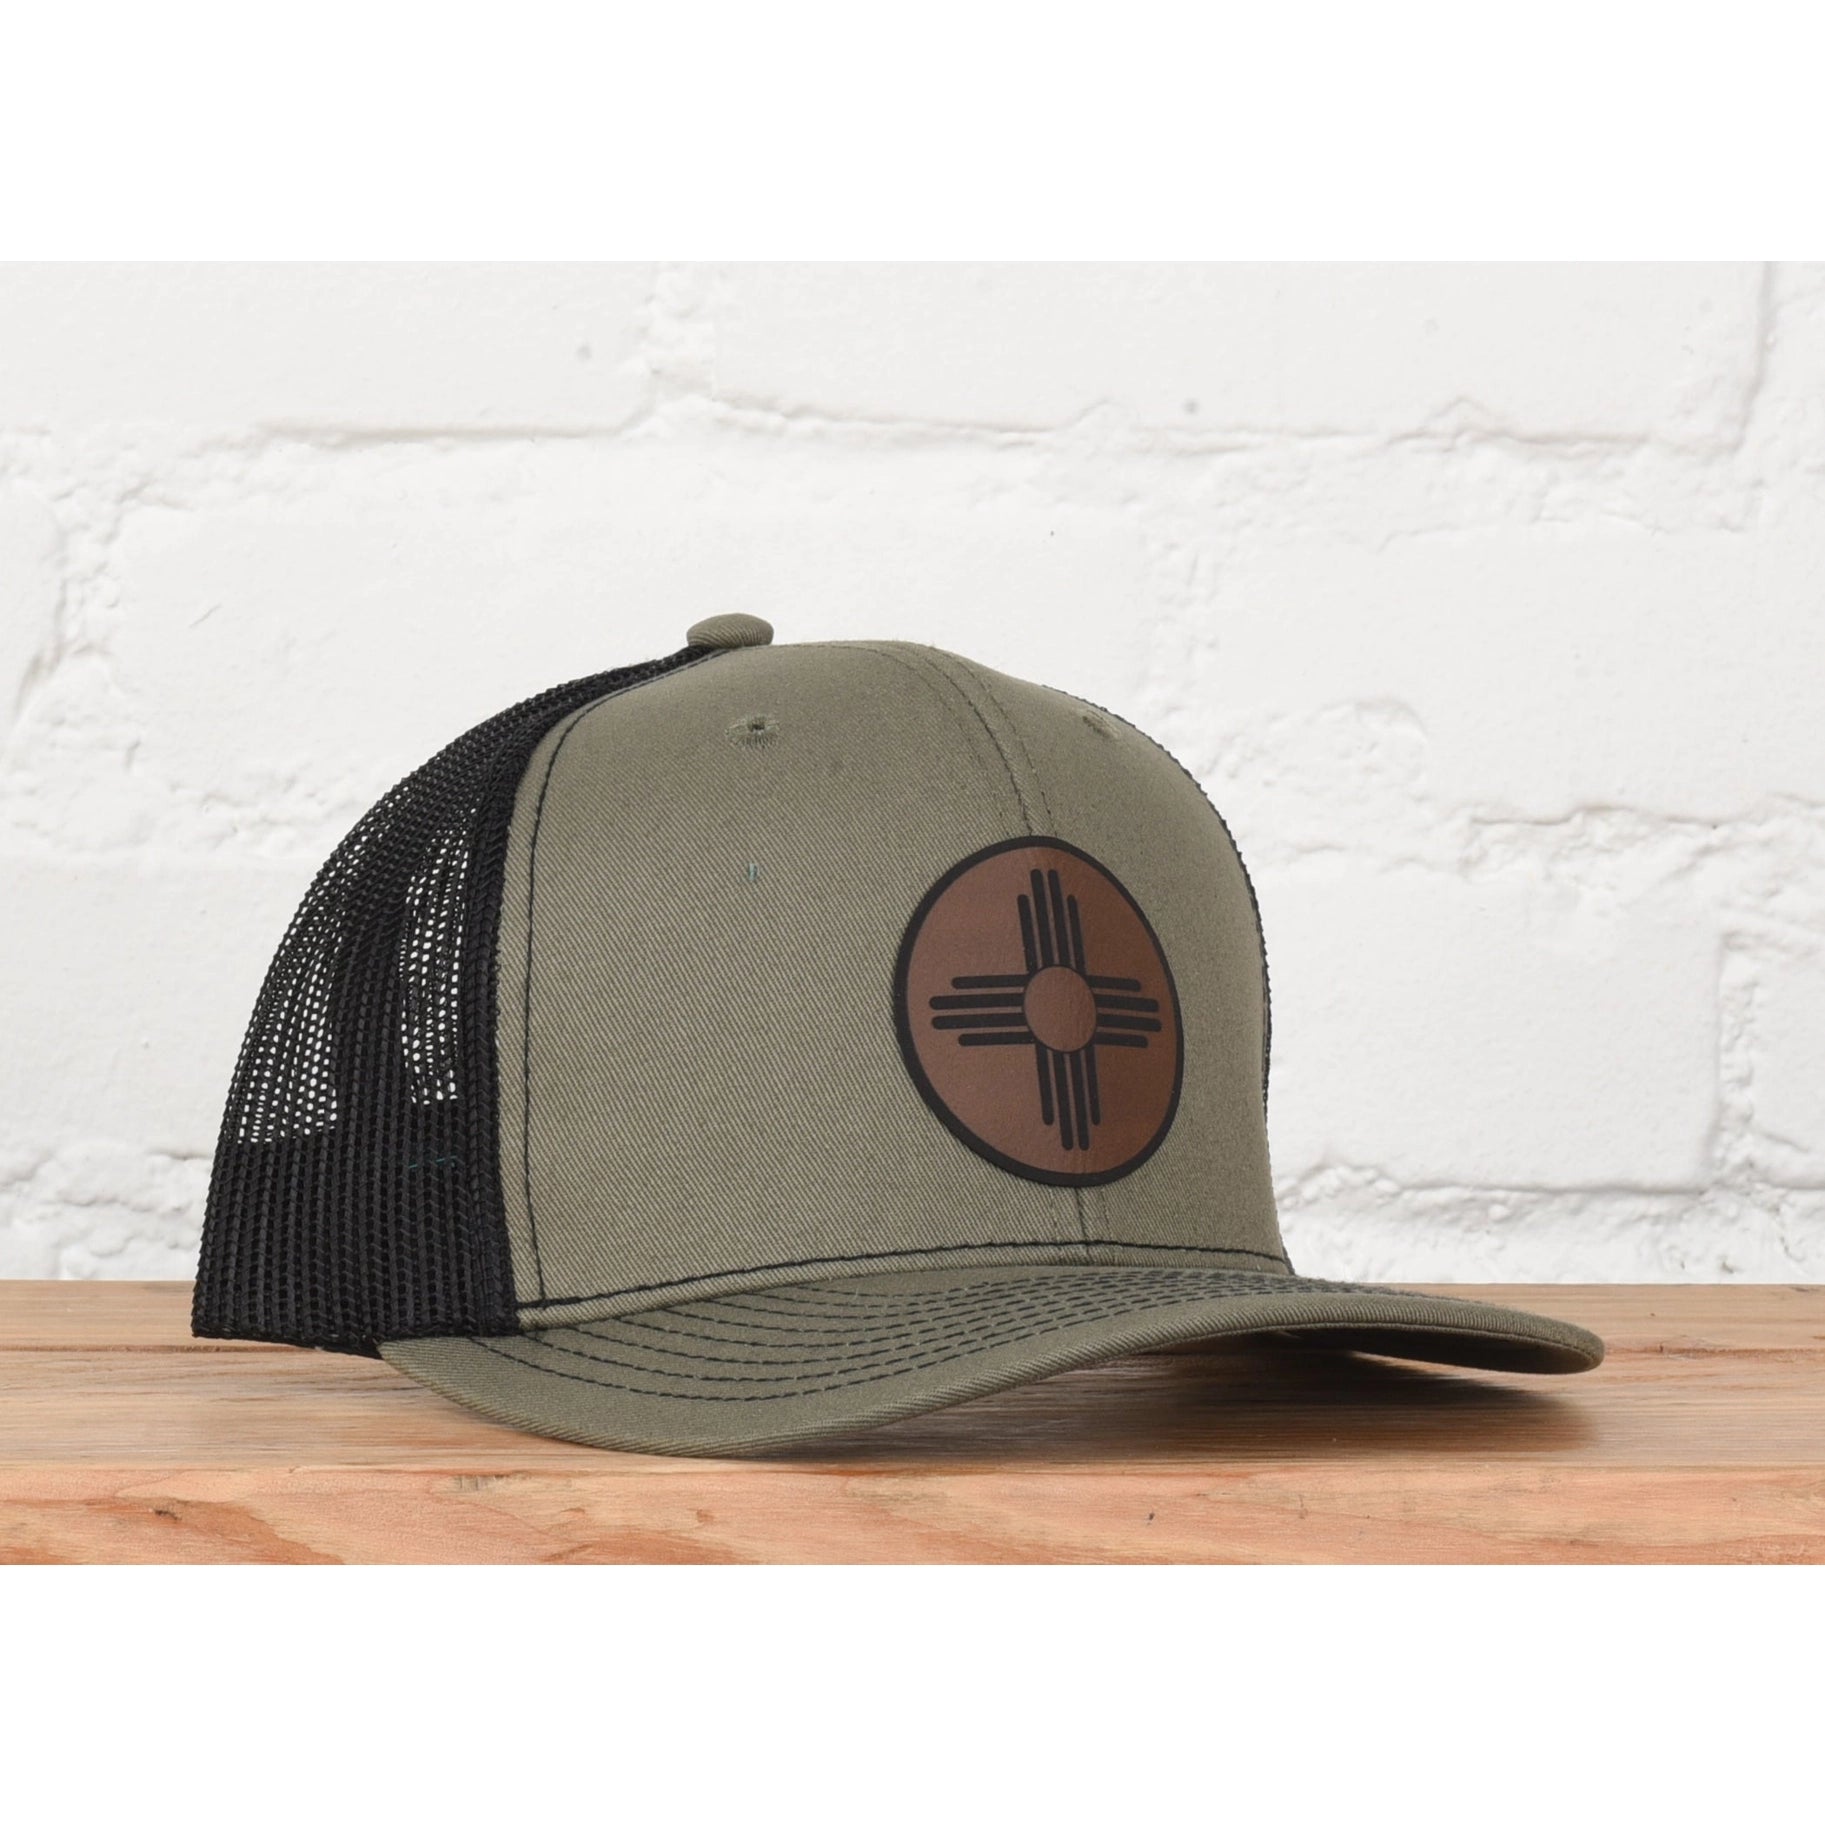 New Mexico Sun Leather Patch Snapback - Loden/Black